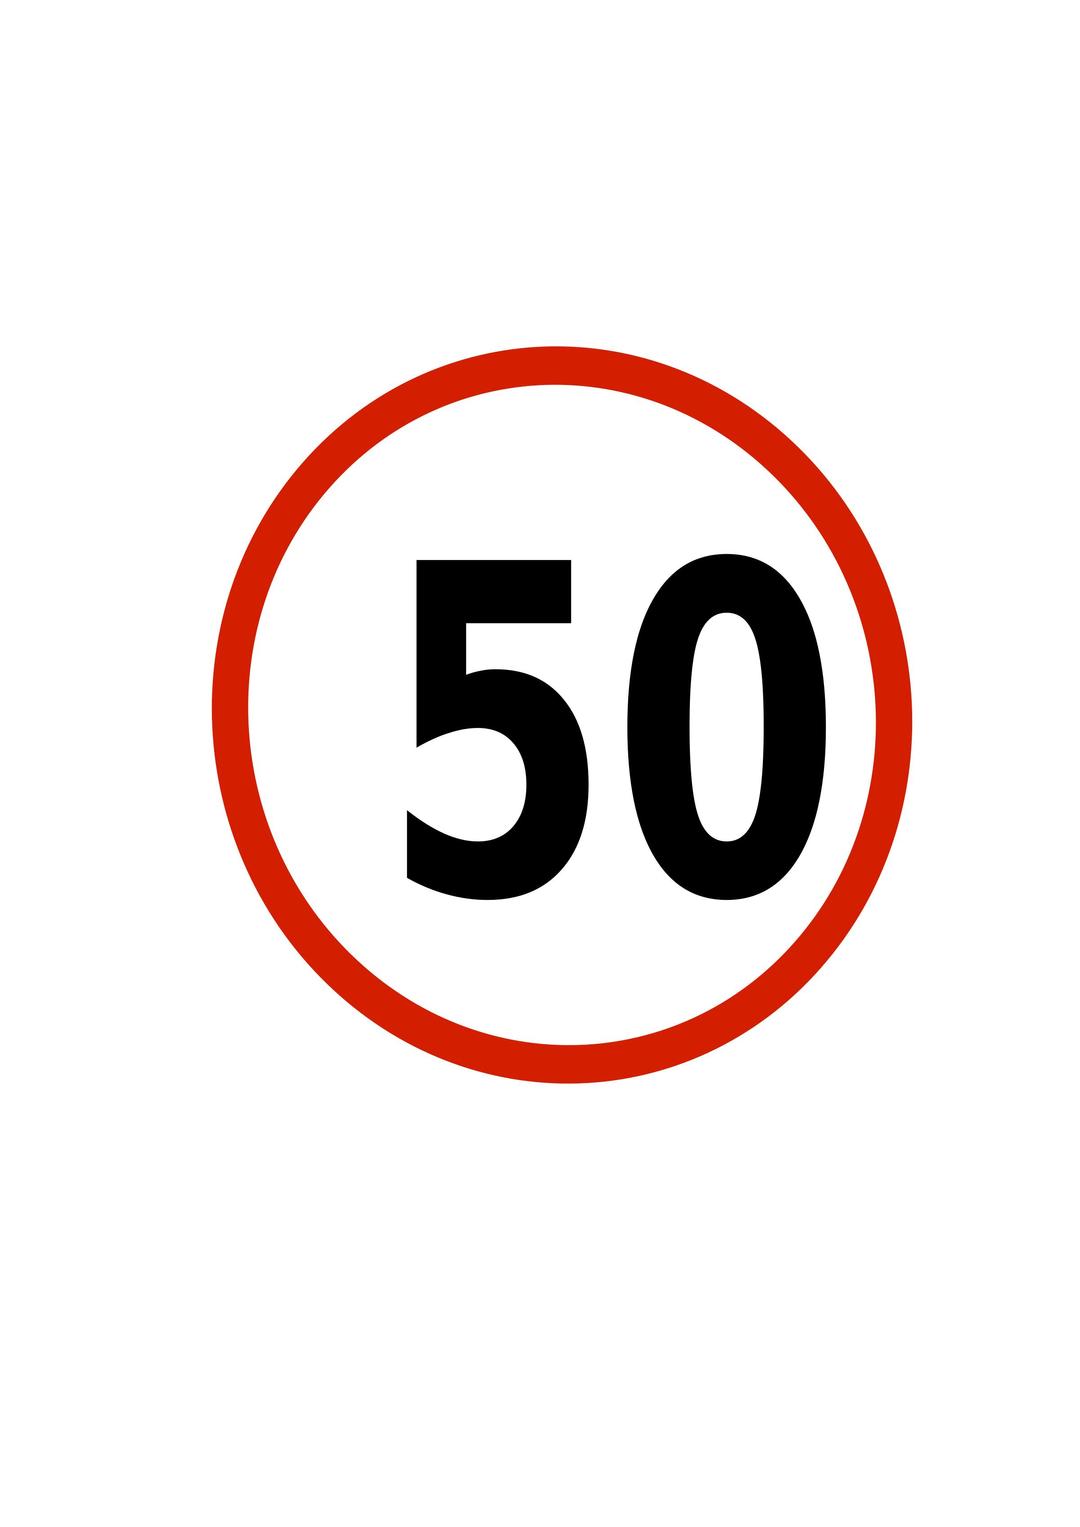 Indian road sign - Speed limit png transparent